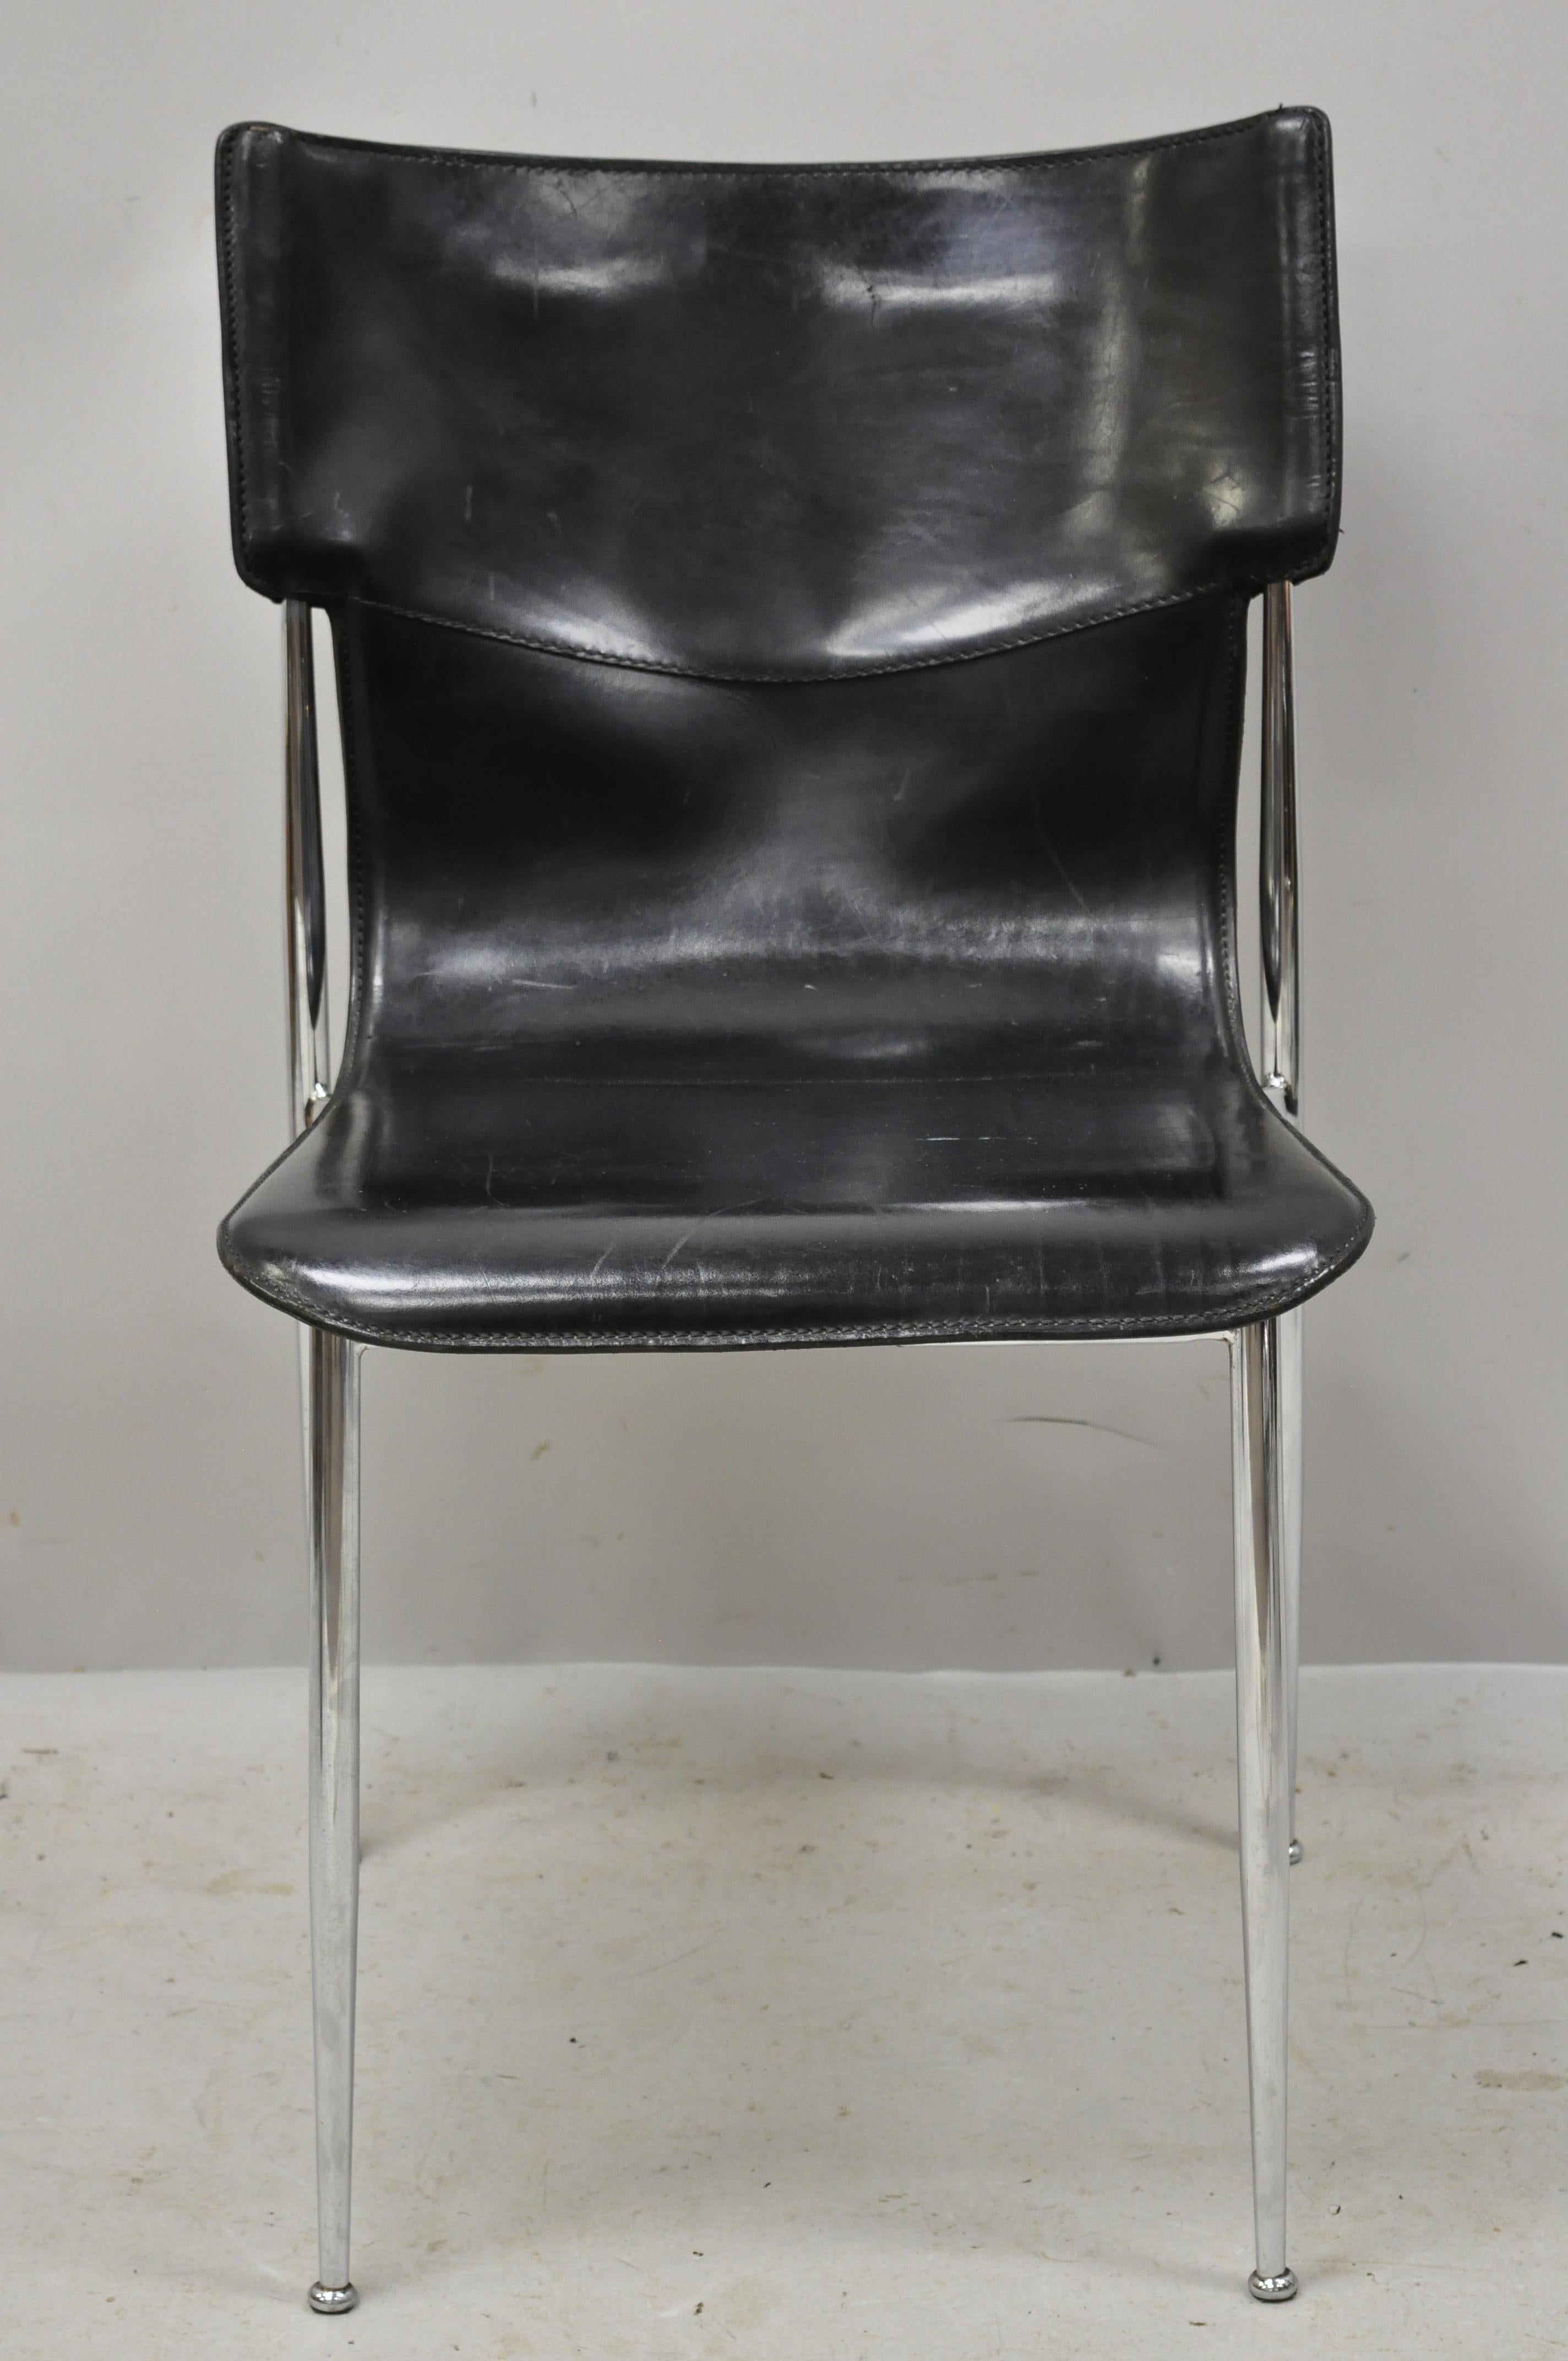 20th century Giancarlo Vegni for Fasem black saddle leather chrome side chair. Item features black stitched saddle leather seat, tapered chrome frame, original stamp, quality Italian craftsmanship, sleek sculptural form, circa mid-late 20th century.